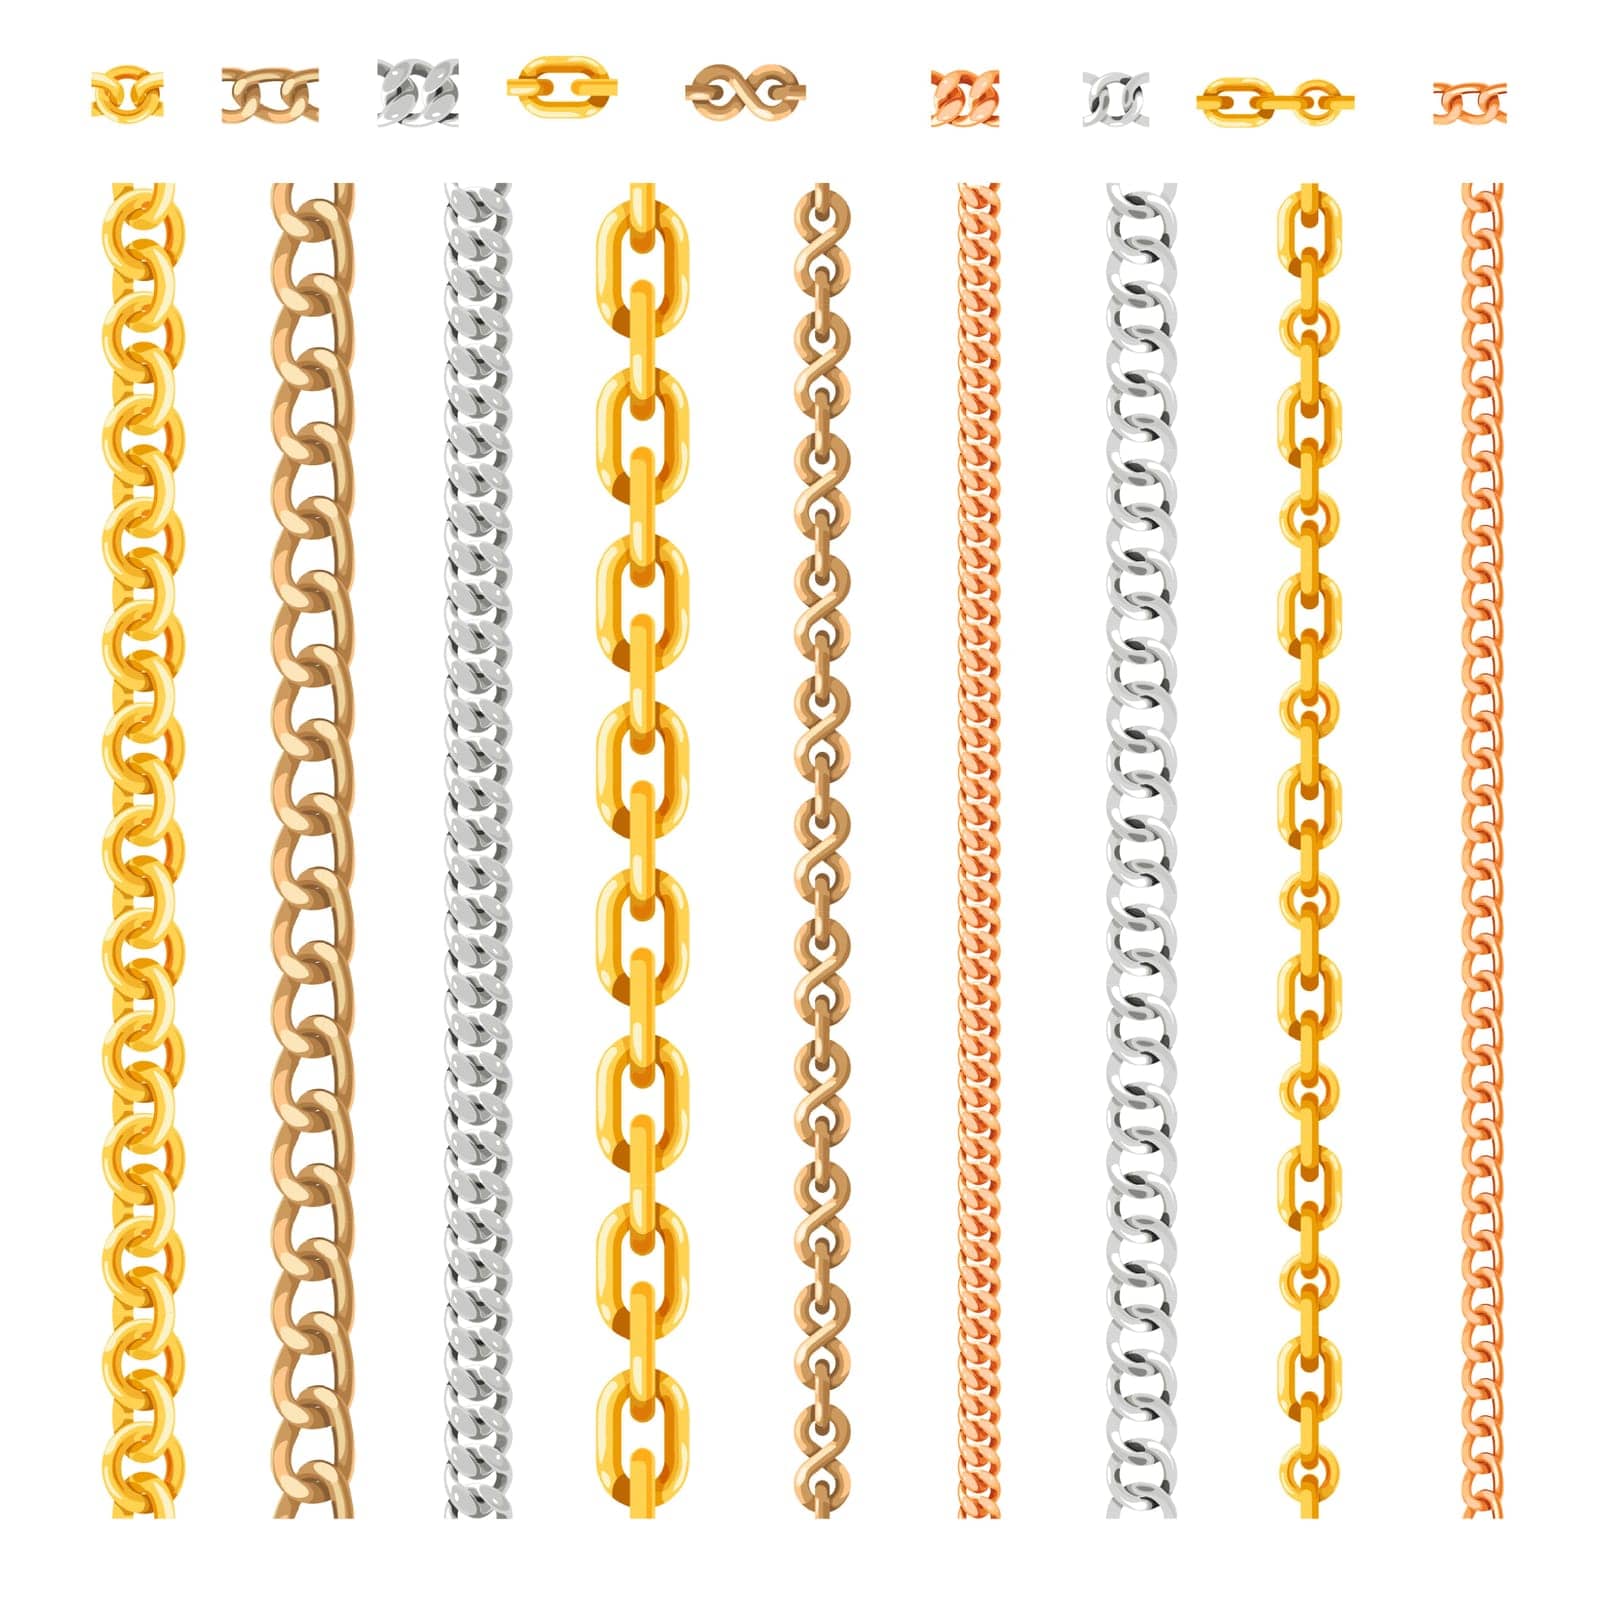 Chainlets with variety chain links for men and women. Gold and silver, stainless steel and copper necklaces. Jewels from precious metals. Advertising and fashion concept. Vector in flat style